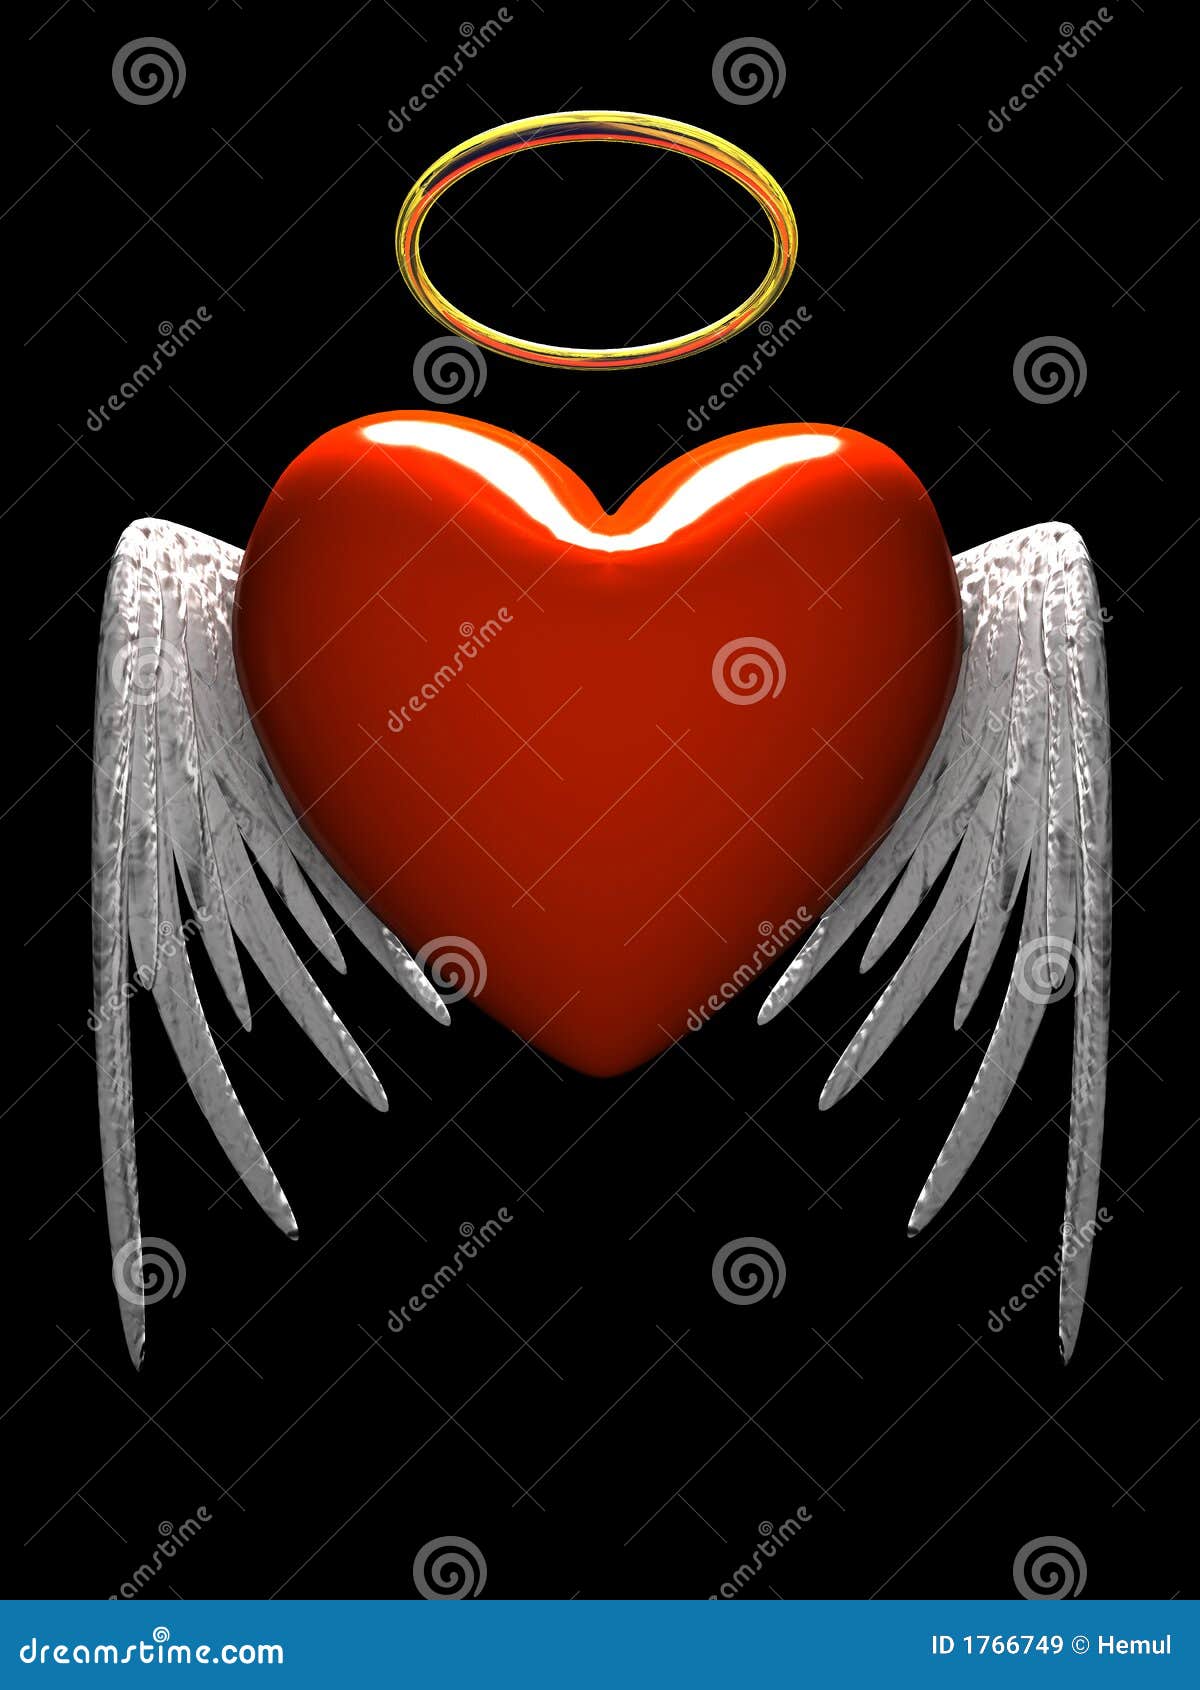 Red Heart Angel With Wings Isolated On Black Background Stock